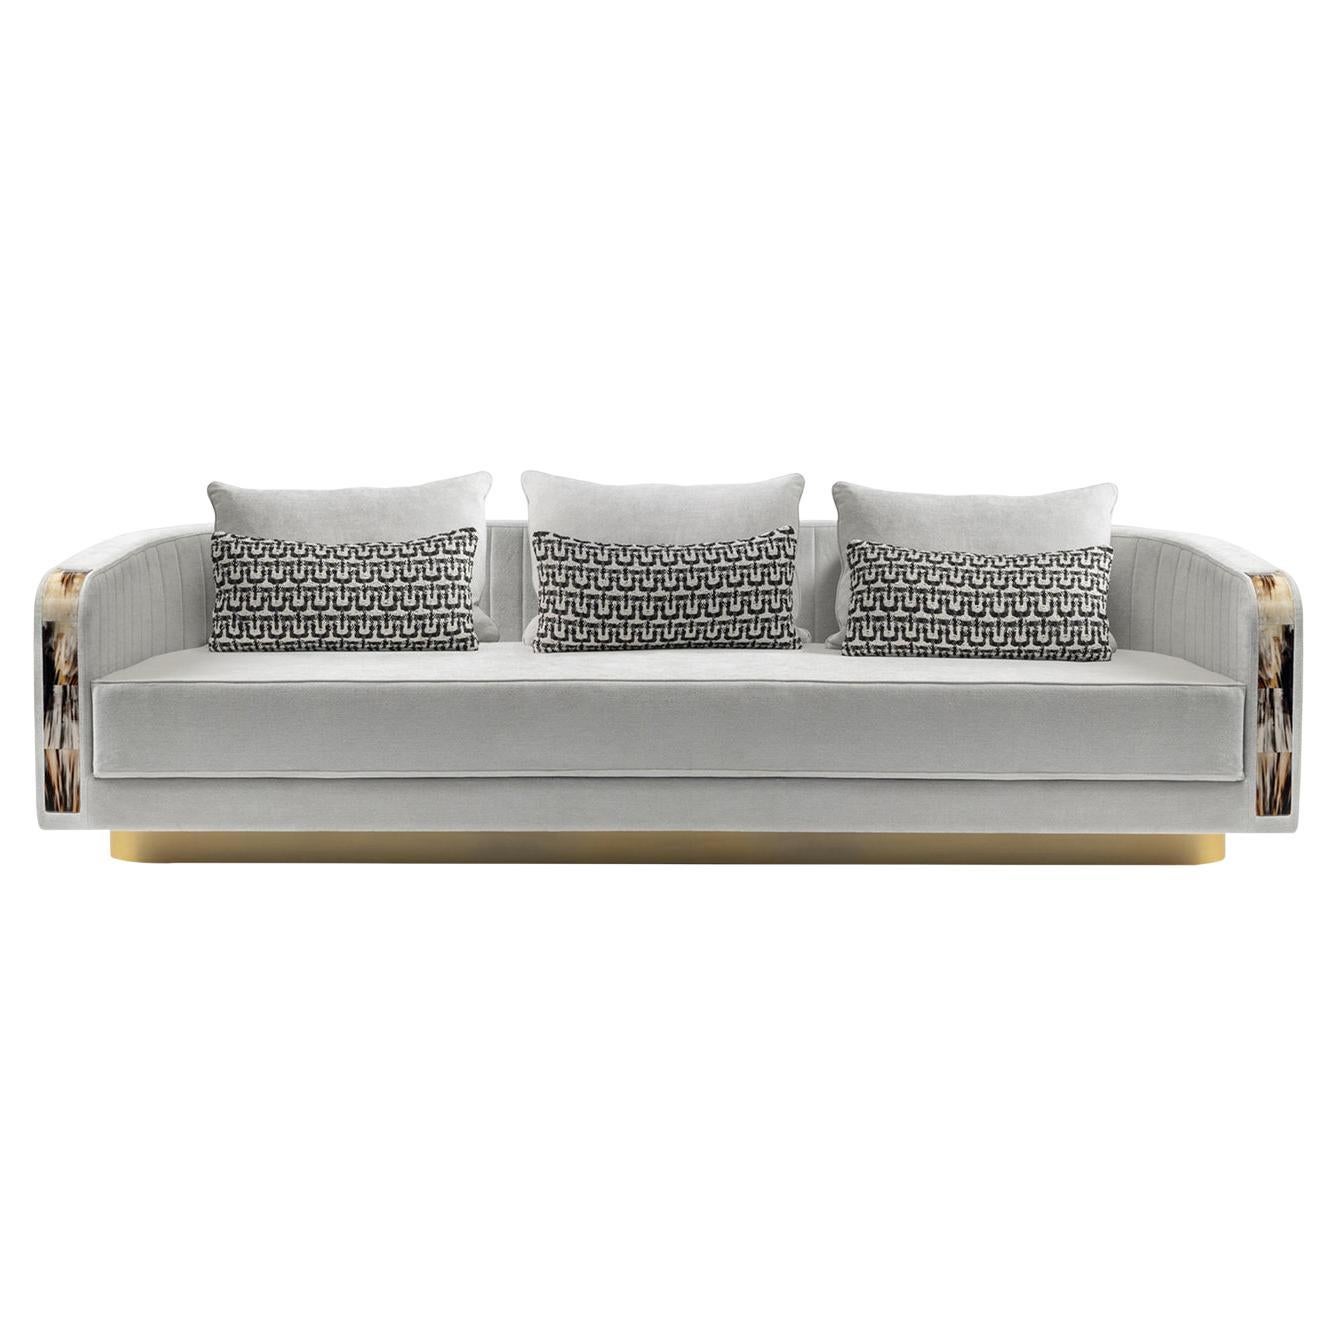 Afrodite 3-Seater Ivory Sofa with Horn Inlays For Sale